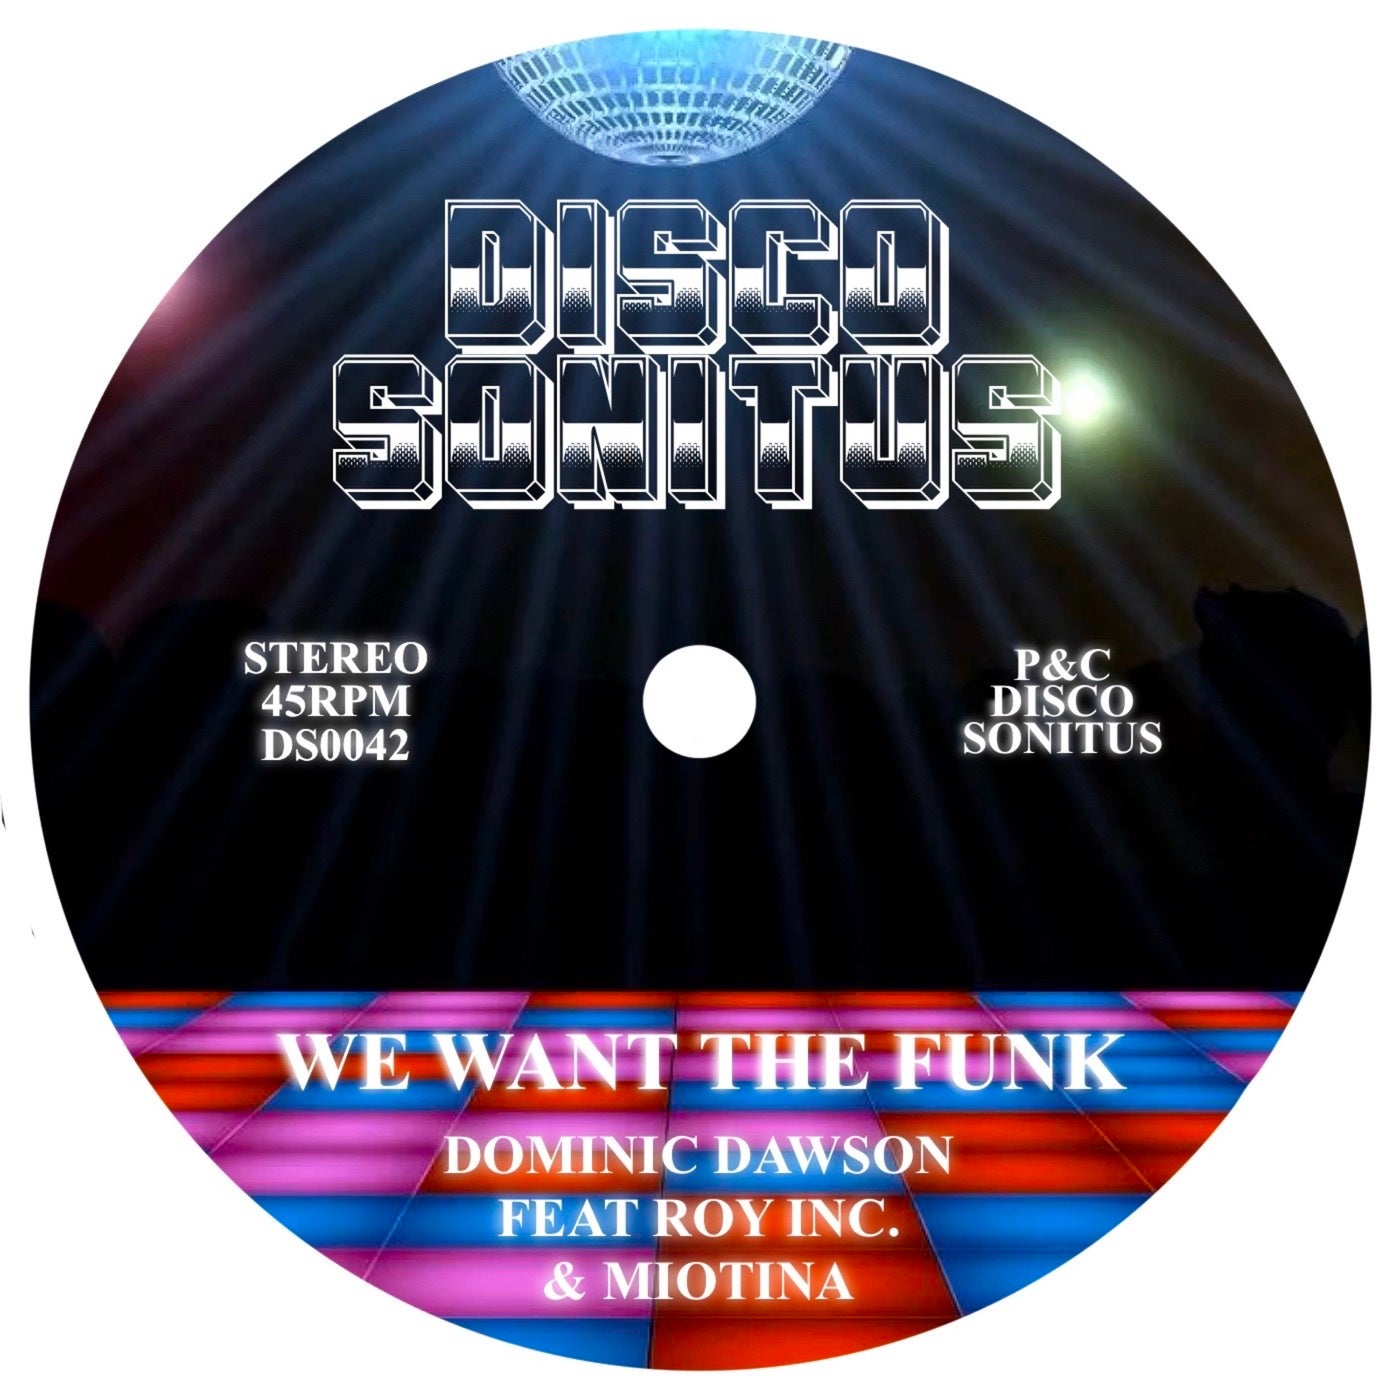 We Want The Funk (feat. ROY INC. & Miotina)